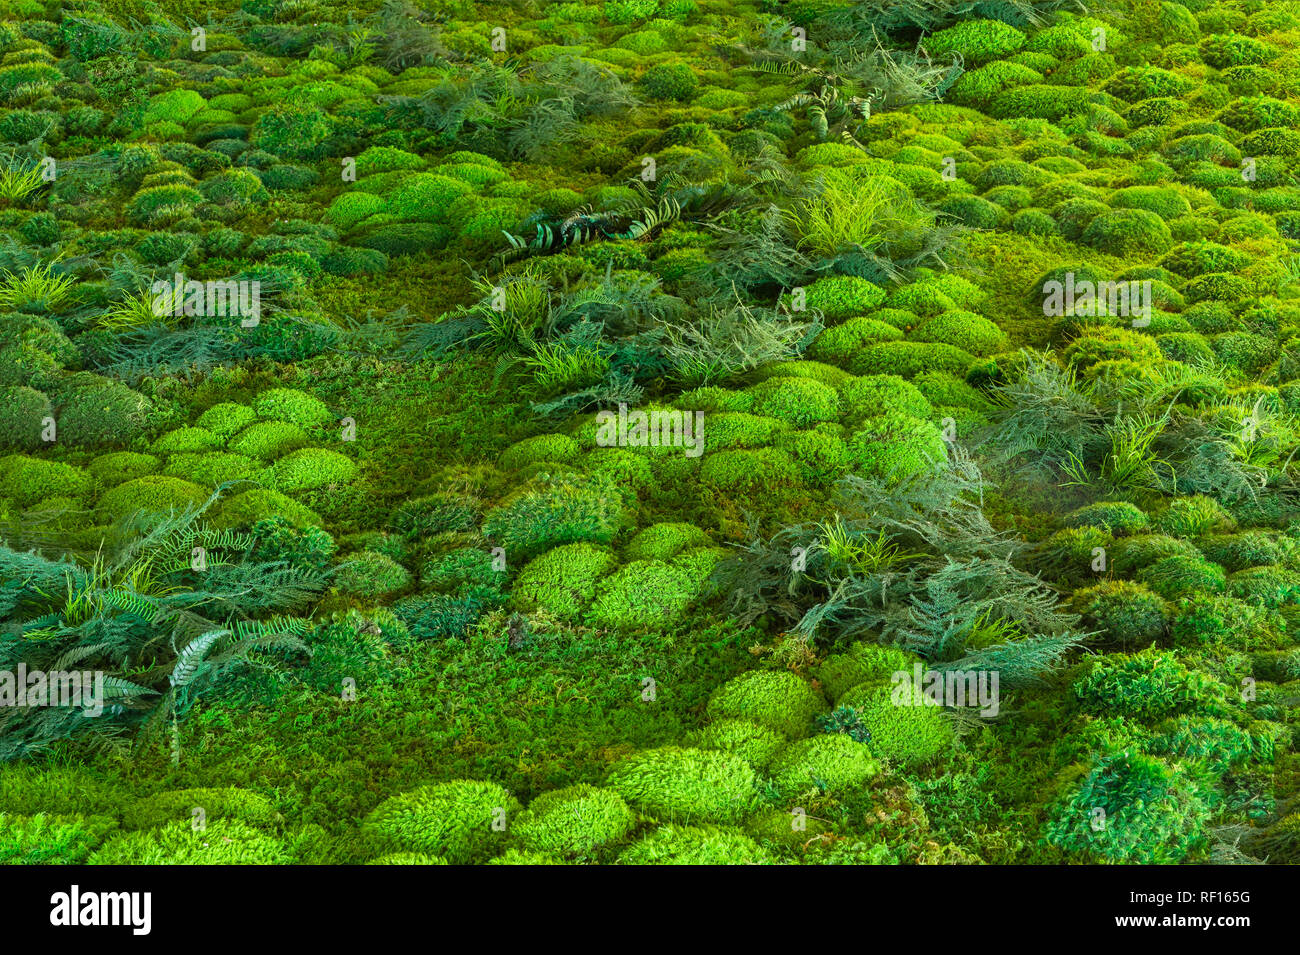 Ferns & Moss Covered Forest Floor, Pennsylvania, USA Stock Photo